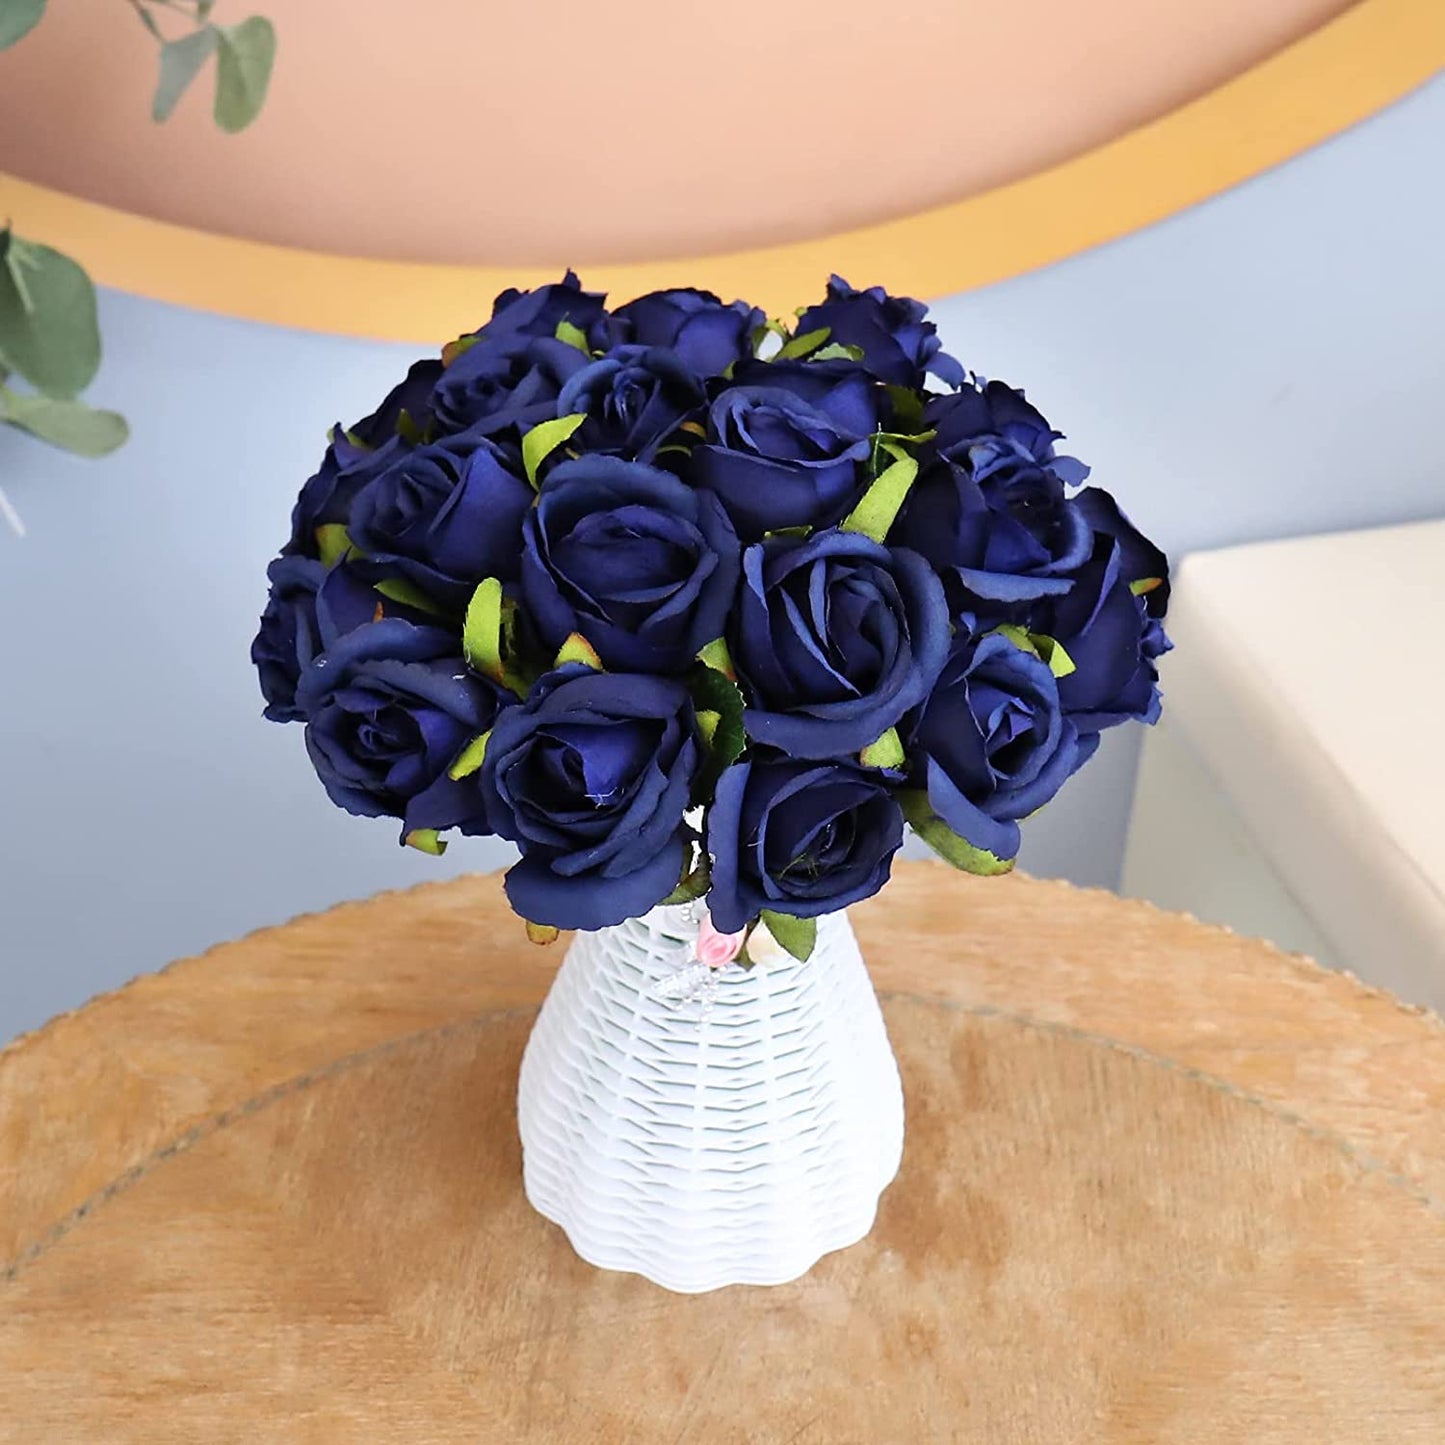 24 PCS Artificial Flowers, Real Touch Fake Flowers for Decoration, Artificial Rose with Stems for Room Decor and Home Wedding Party Baby Shower Centerpieces Decorations (Navy Blue)